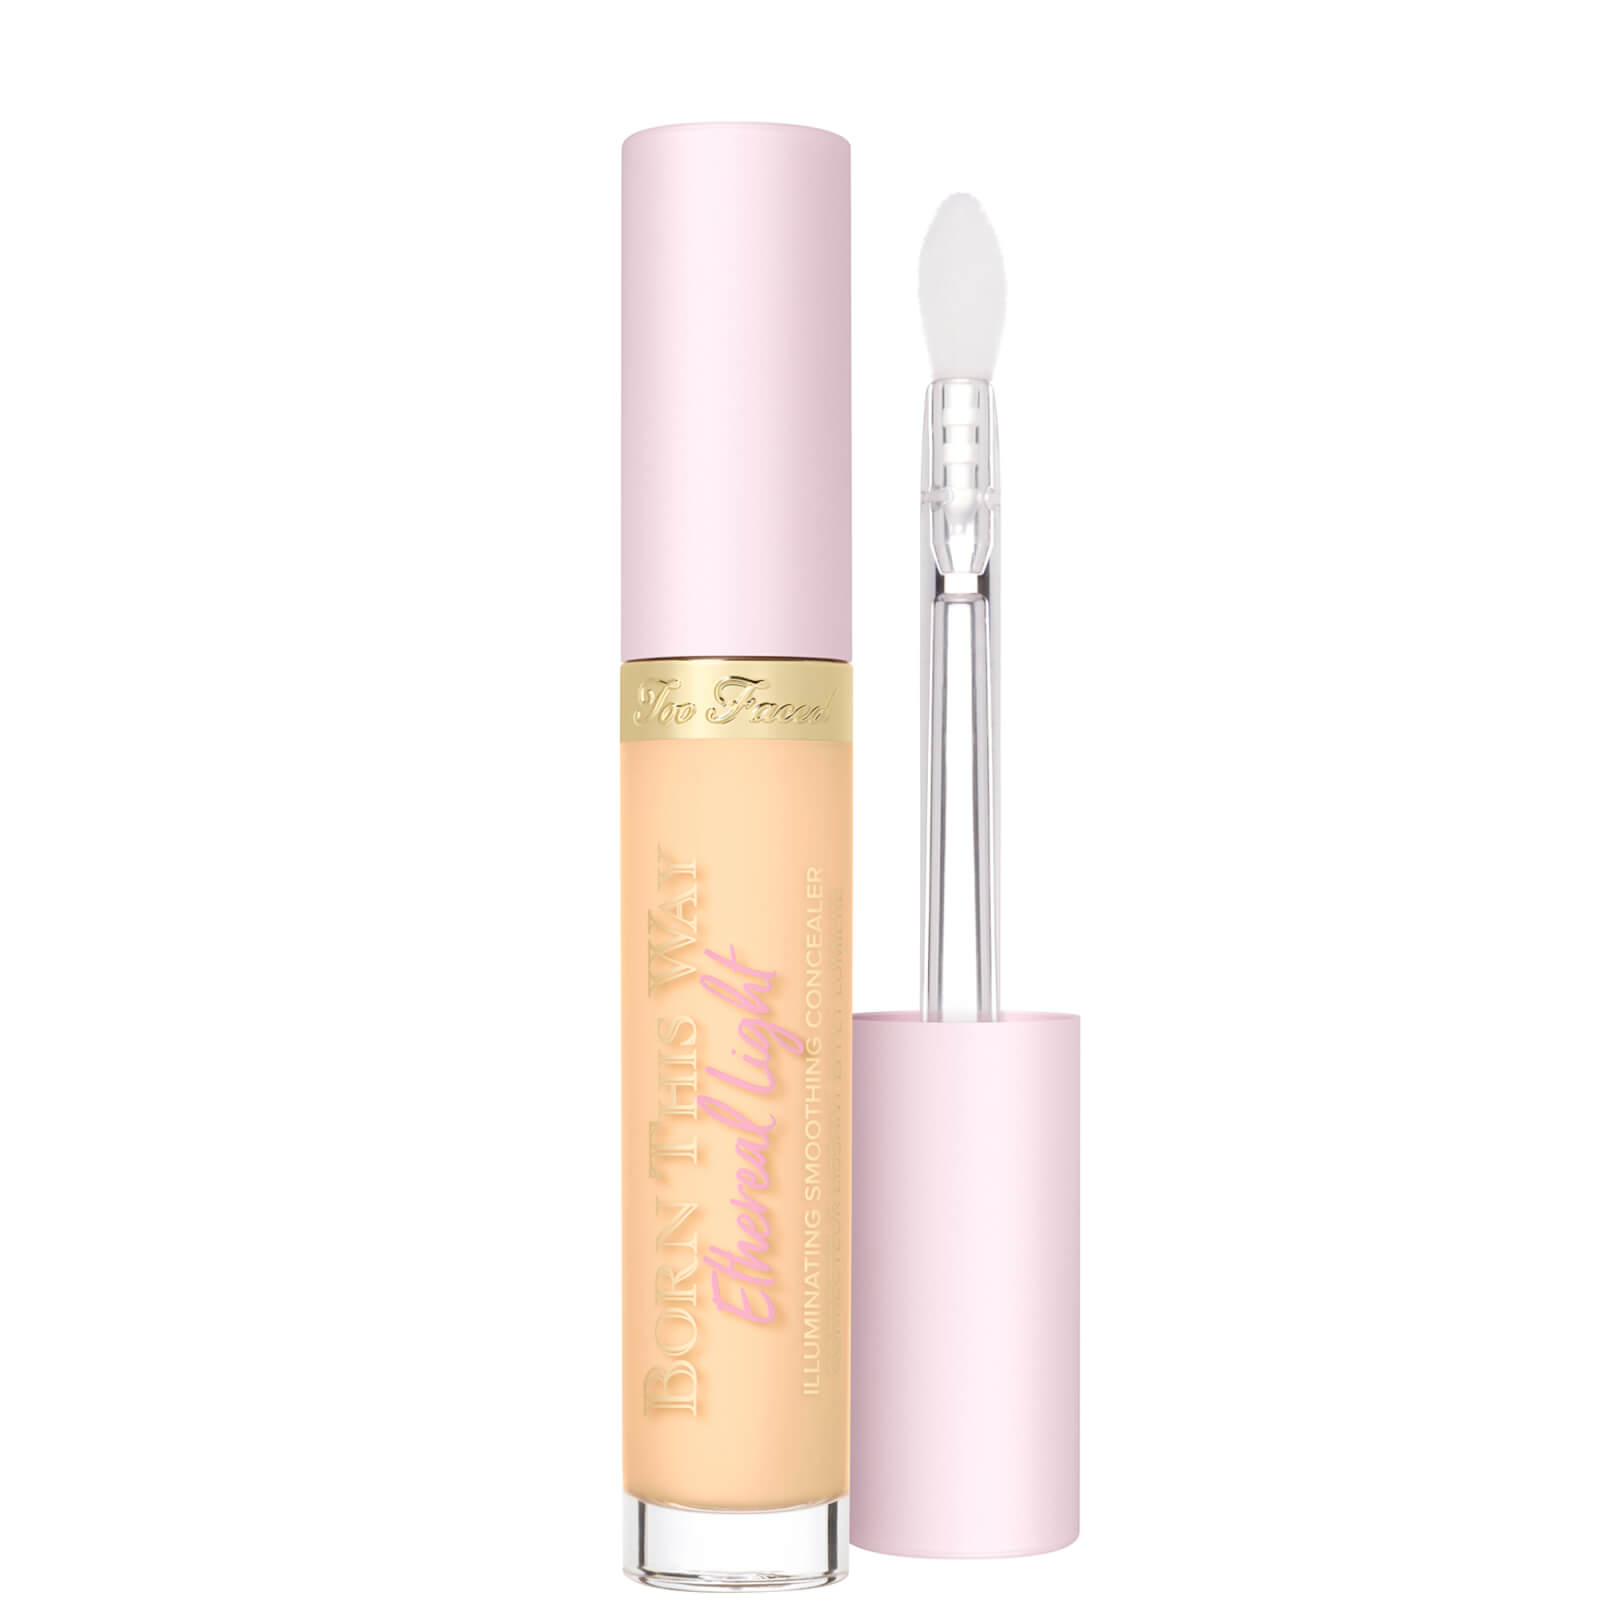 Too Faced Born This Way Ethereal Light Illuminating Smoothing Concealer 15ml (Various Shades) - Graham Cracker